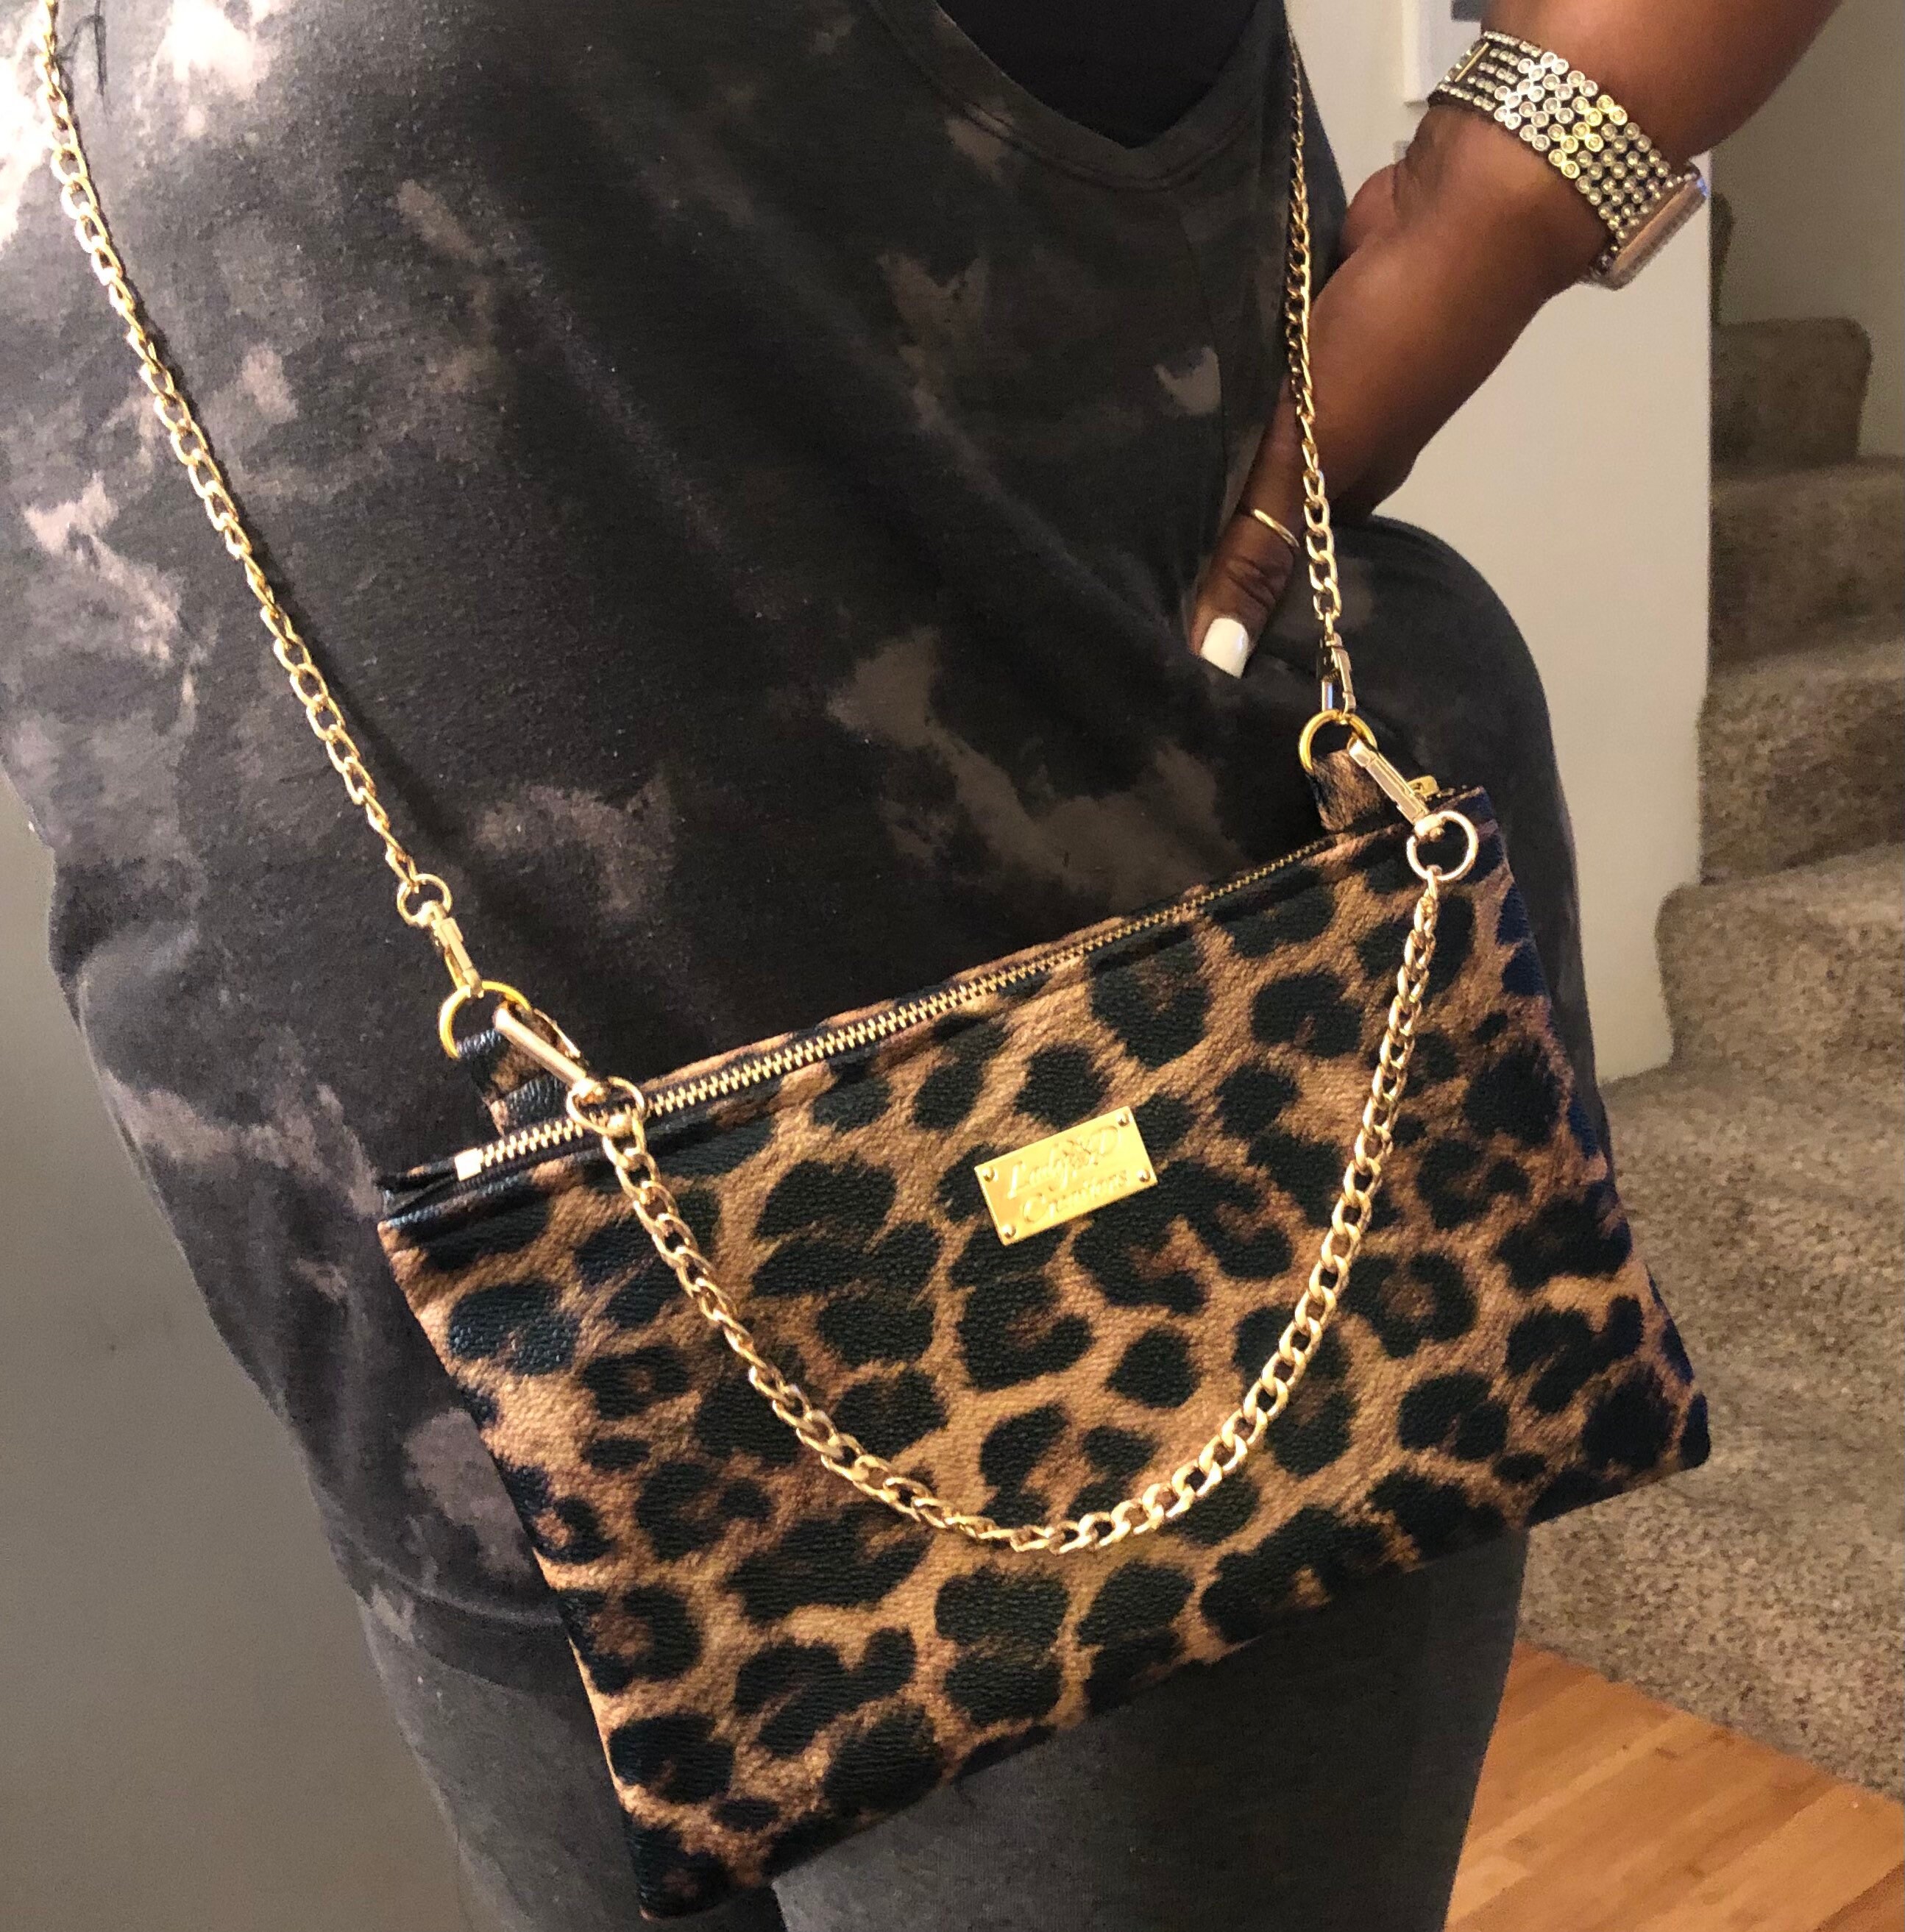 Upcycled swagged out louis vuitton purse  Western bags purses, Bags,  Trending handbag